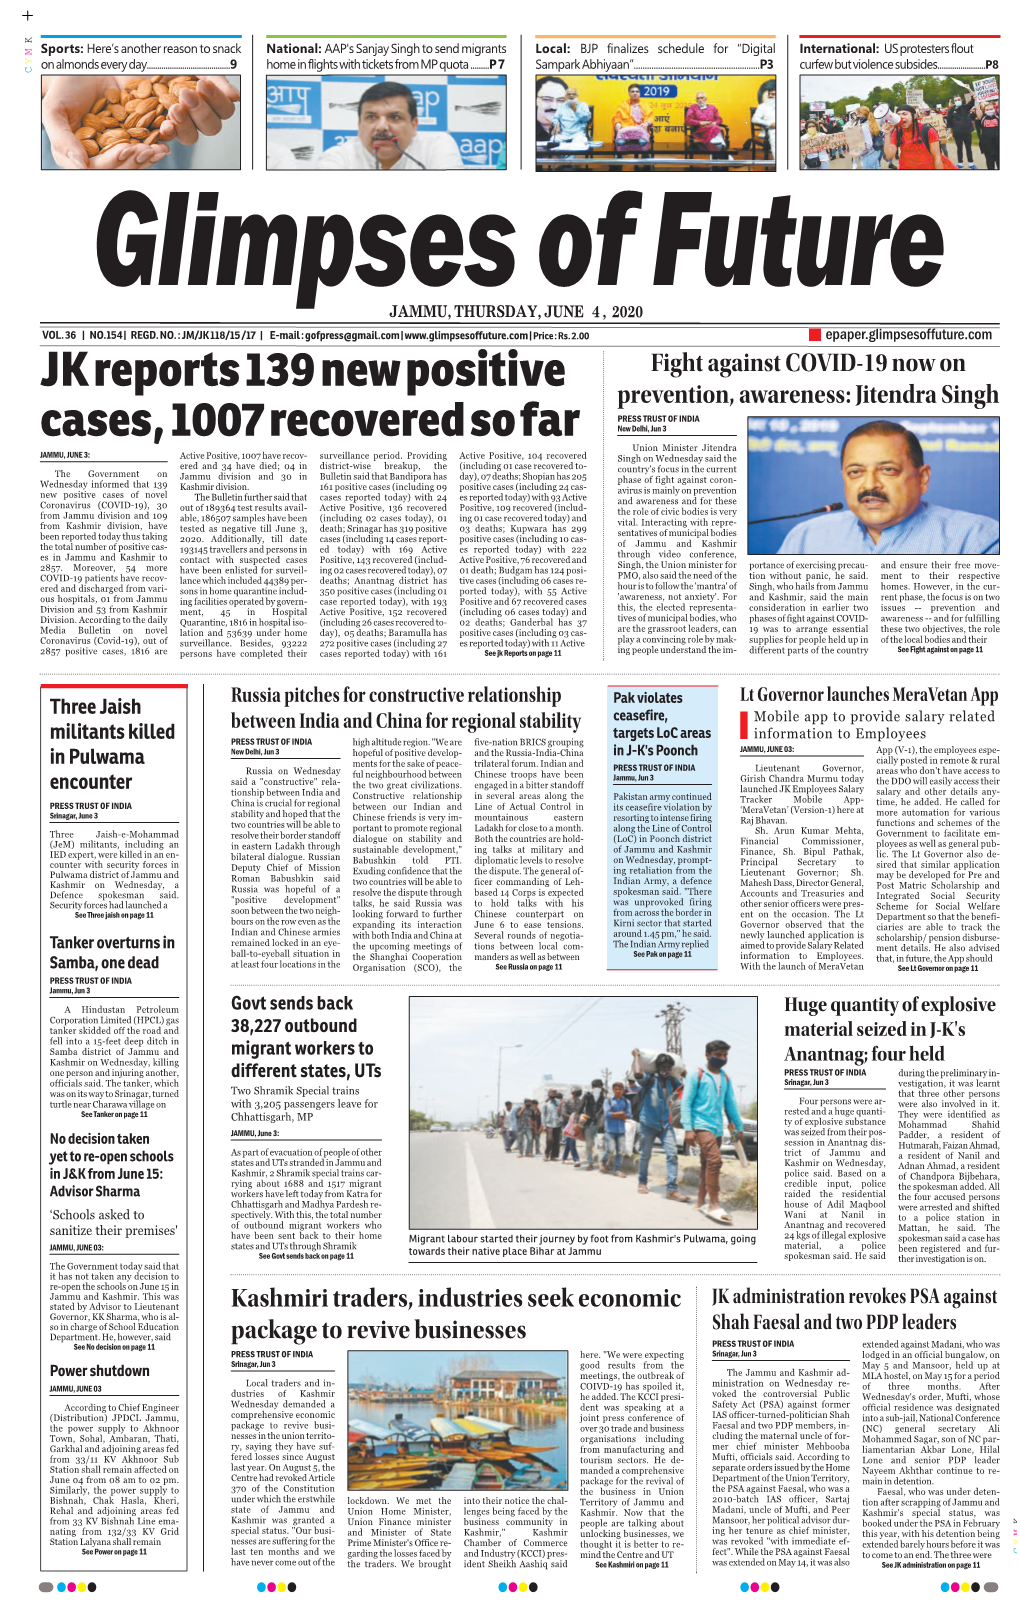 JK Reports 139 New Positive Cases, 1007 Recovered So Far PRESS